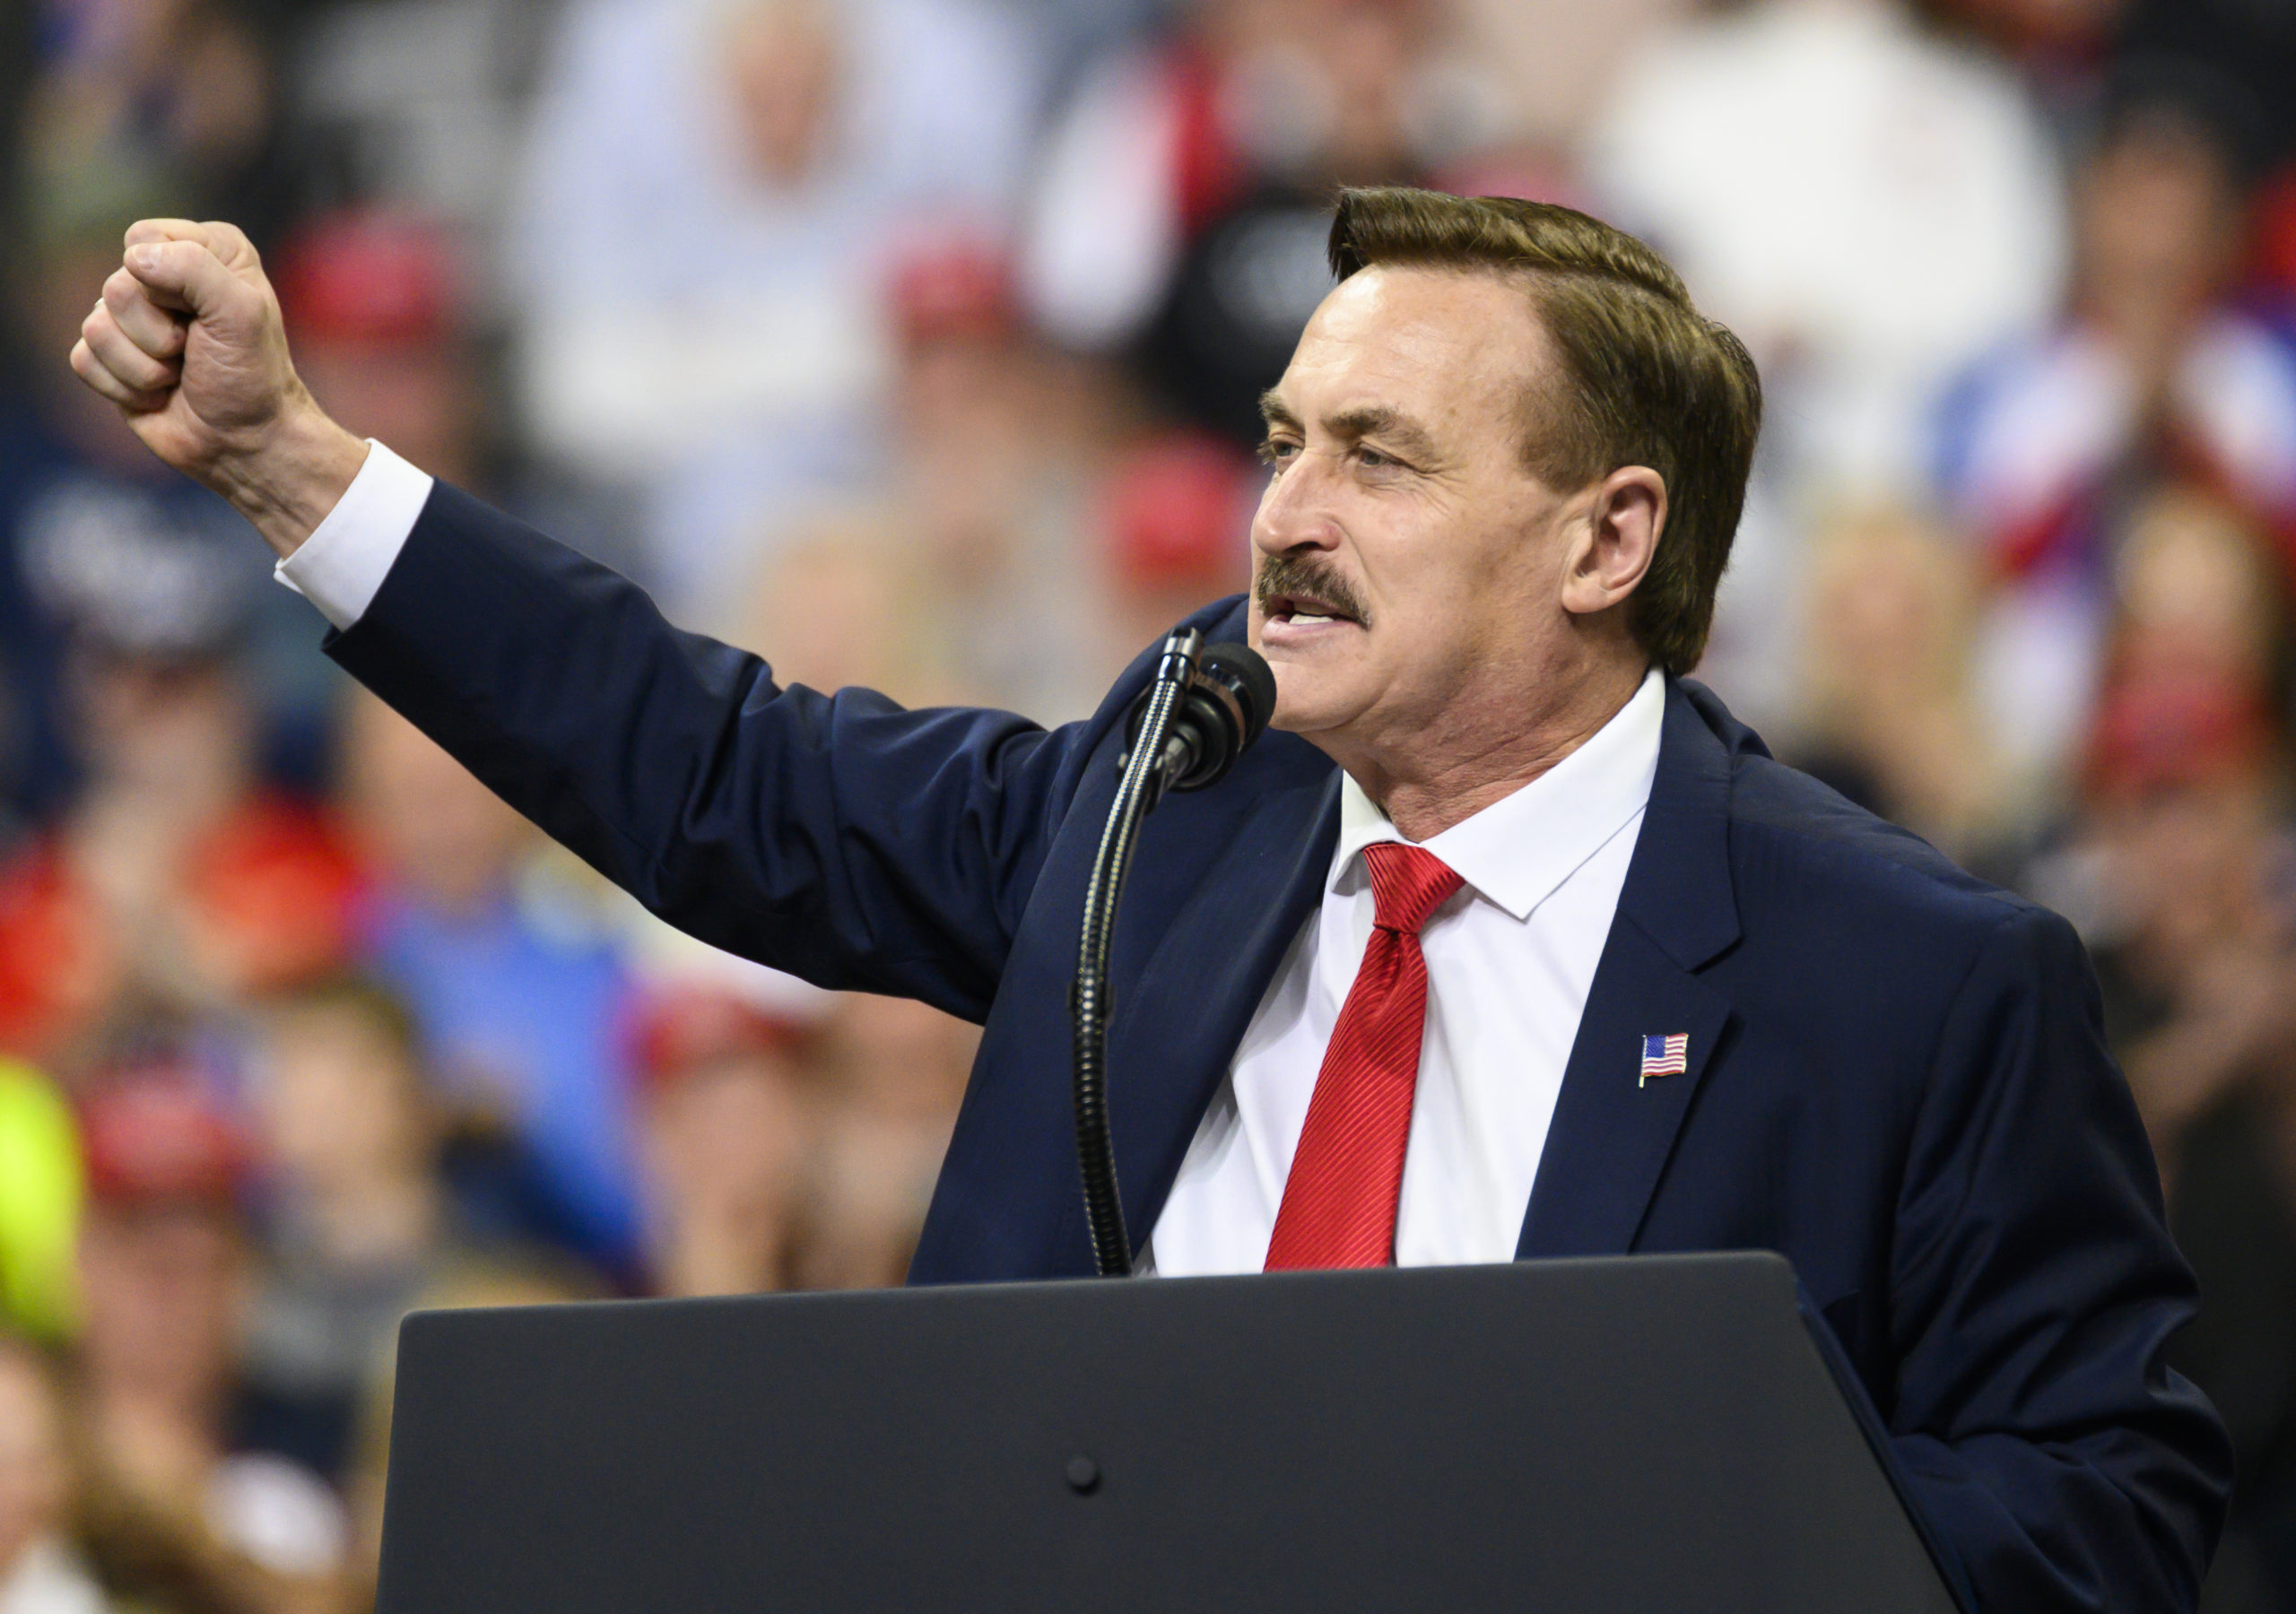 Mike Lindell, CEO of My Pillow, speaks during a campaign rally held by U.S. President Donald Trump at the Target Center on October 10, 2019 in Minneapolis, Minnesota. (Stephen Maturen/Getty Images)